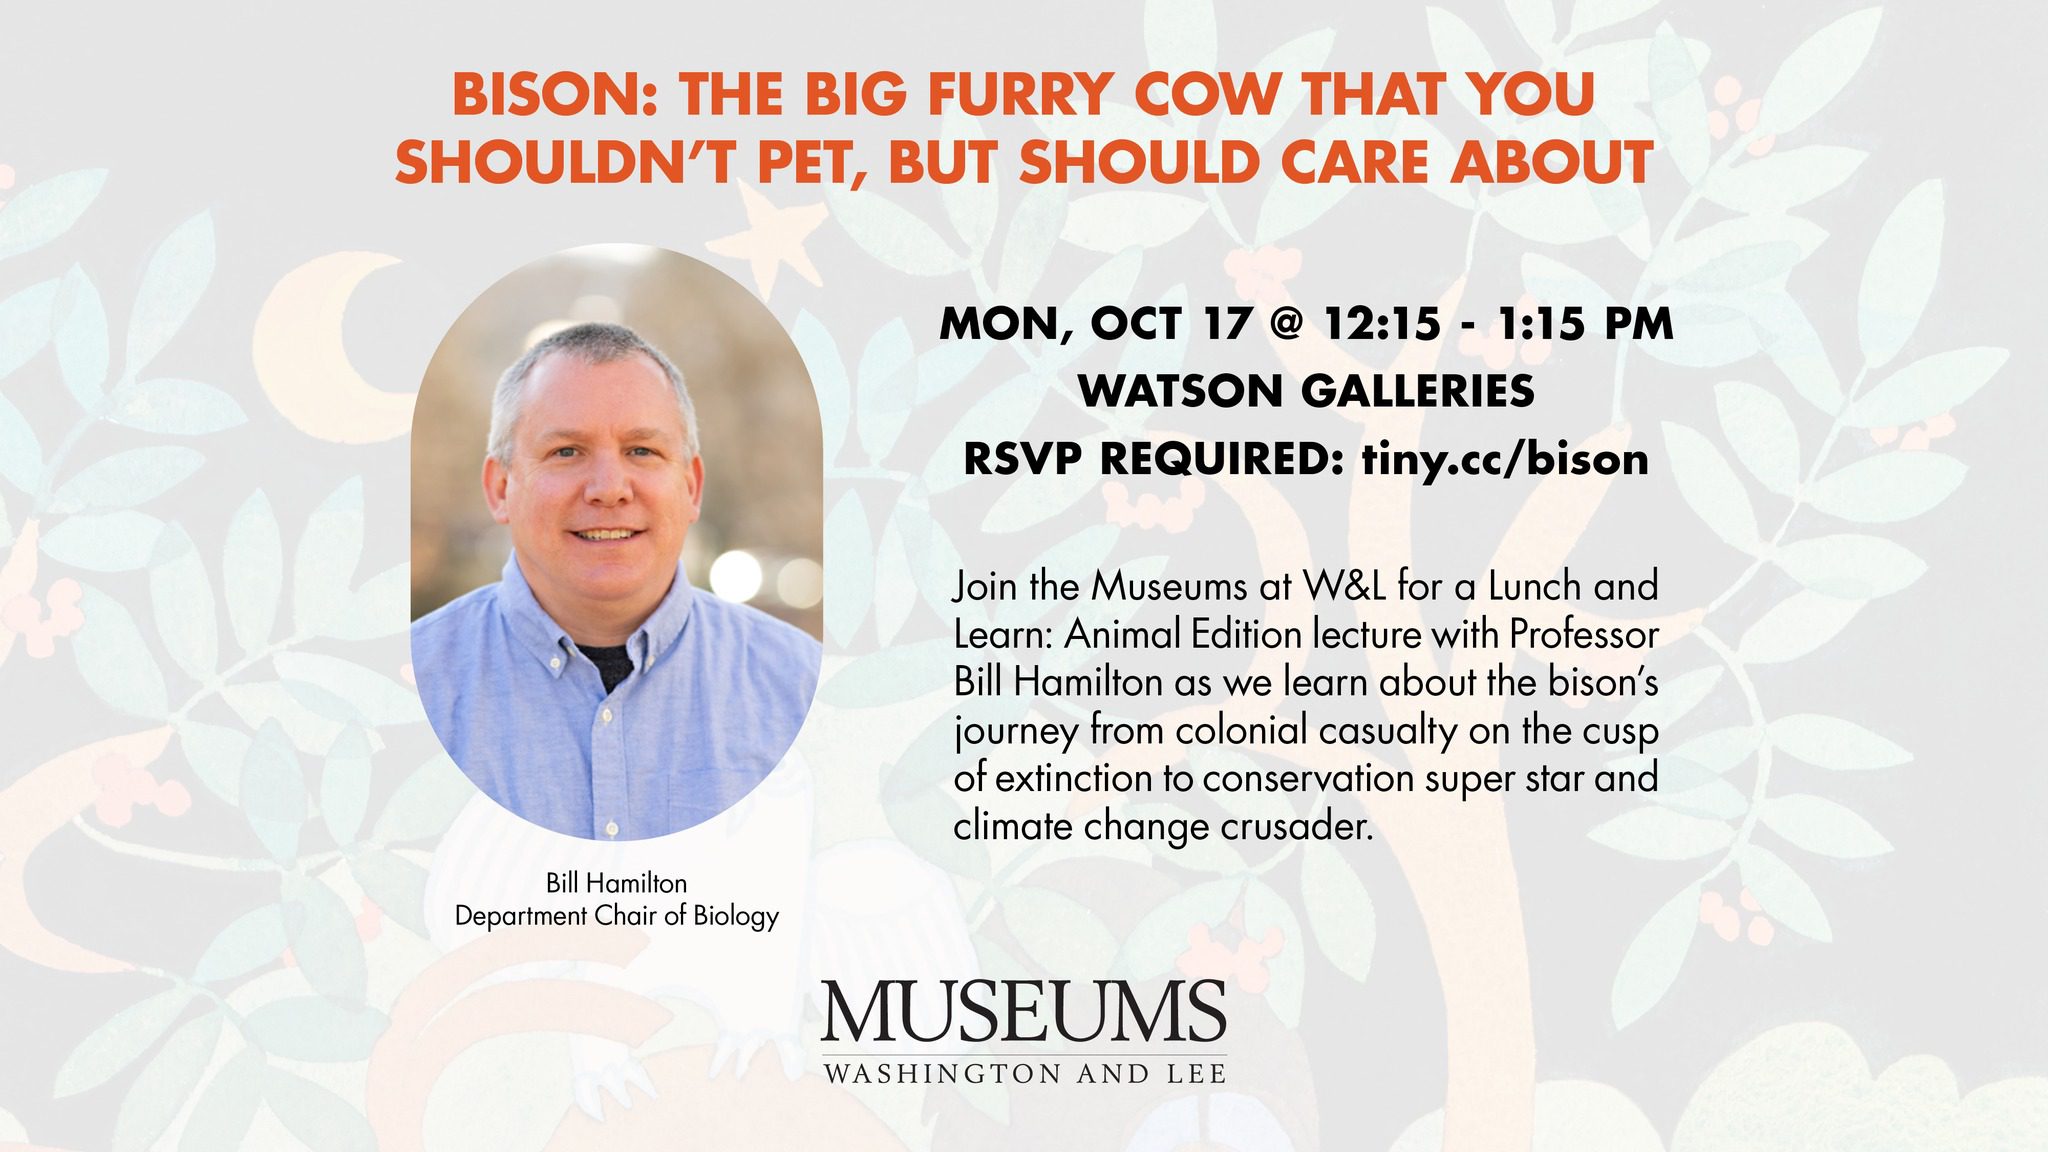 Lunch & Learn: Bison: The Big Furry Cow You Shouldn't Pet, But Should Care About